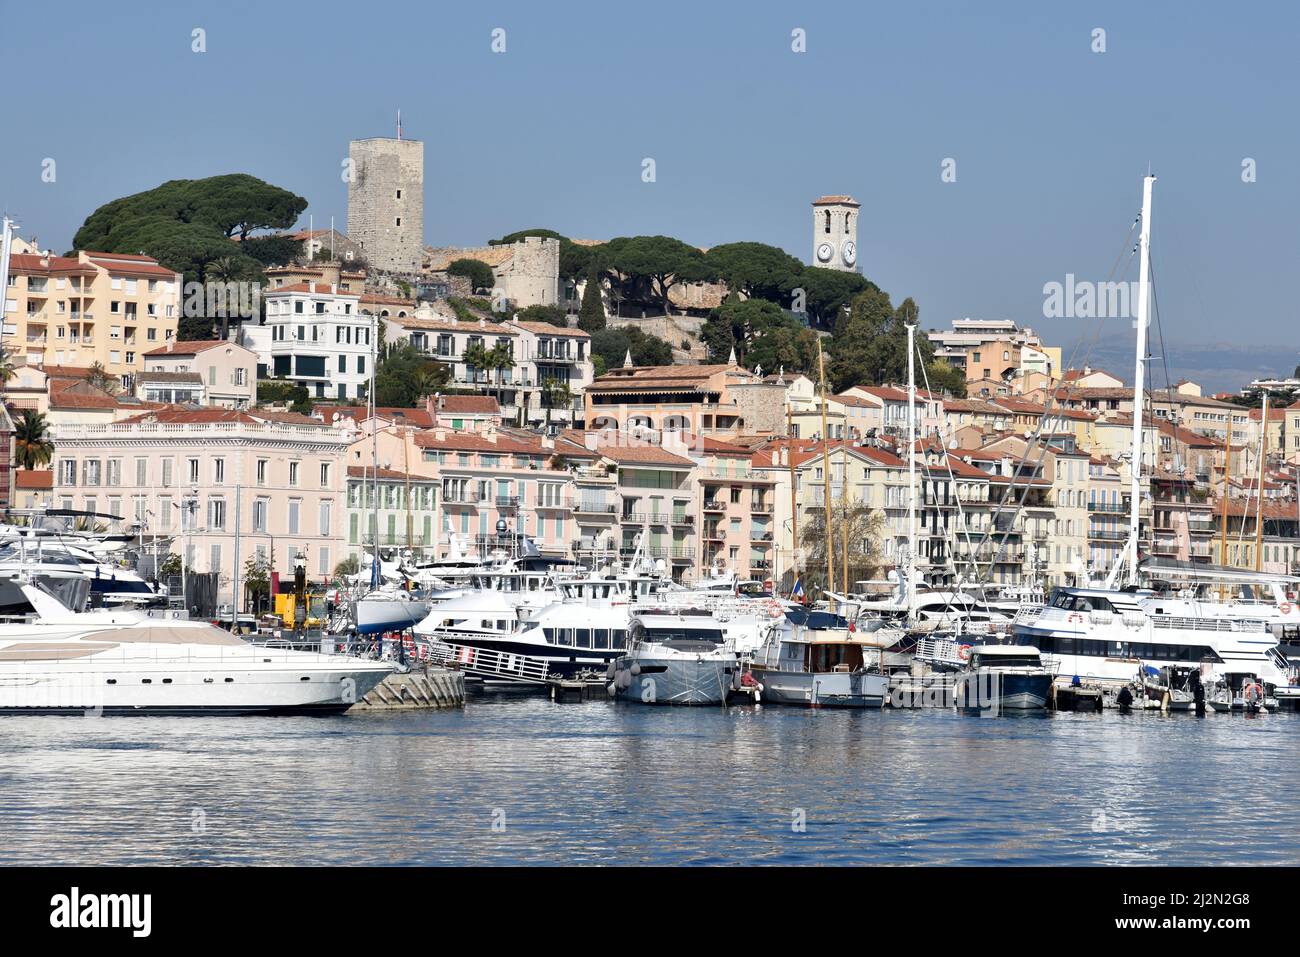 France, french riviera, Cannes, the Suquet is the oldest part of the city, it overlooks the port and the mediterranean sea. Stock Photo